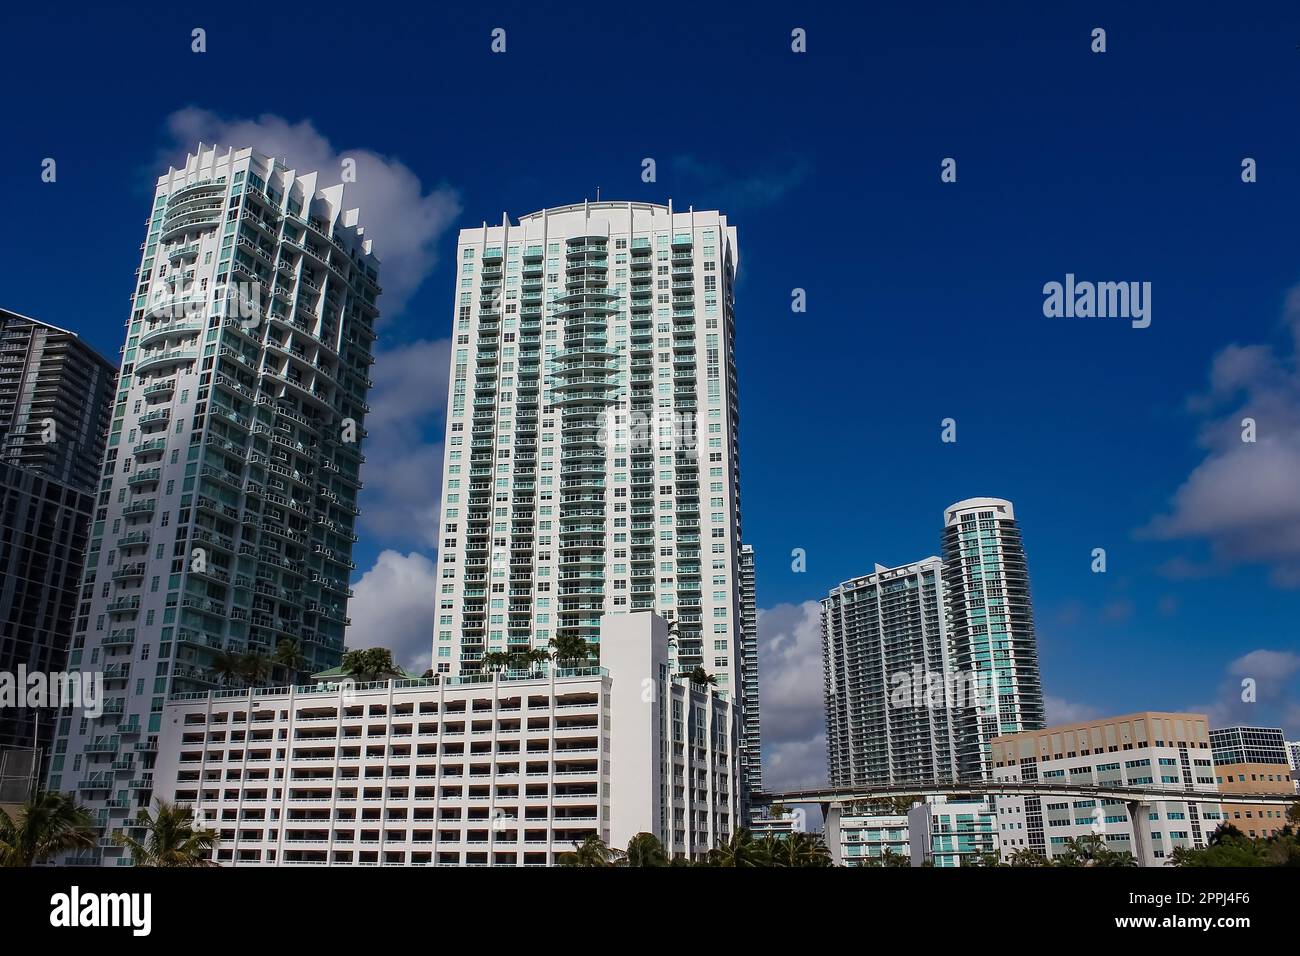 Downtown Miami cityscape view with condos and office buildings. Stock Photo